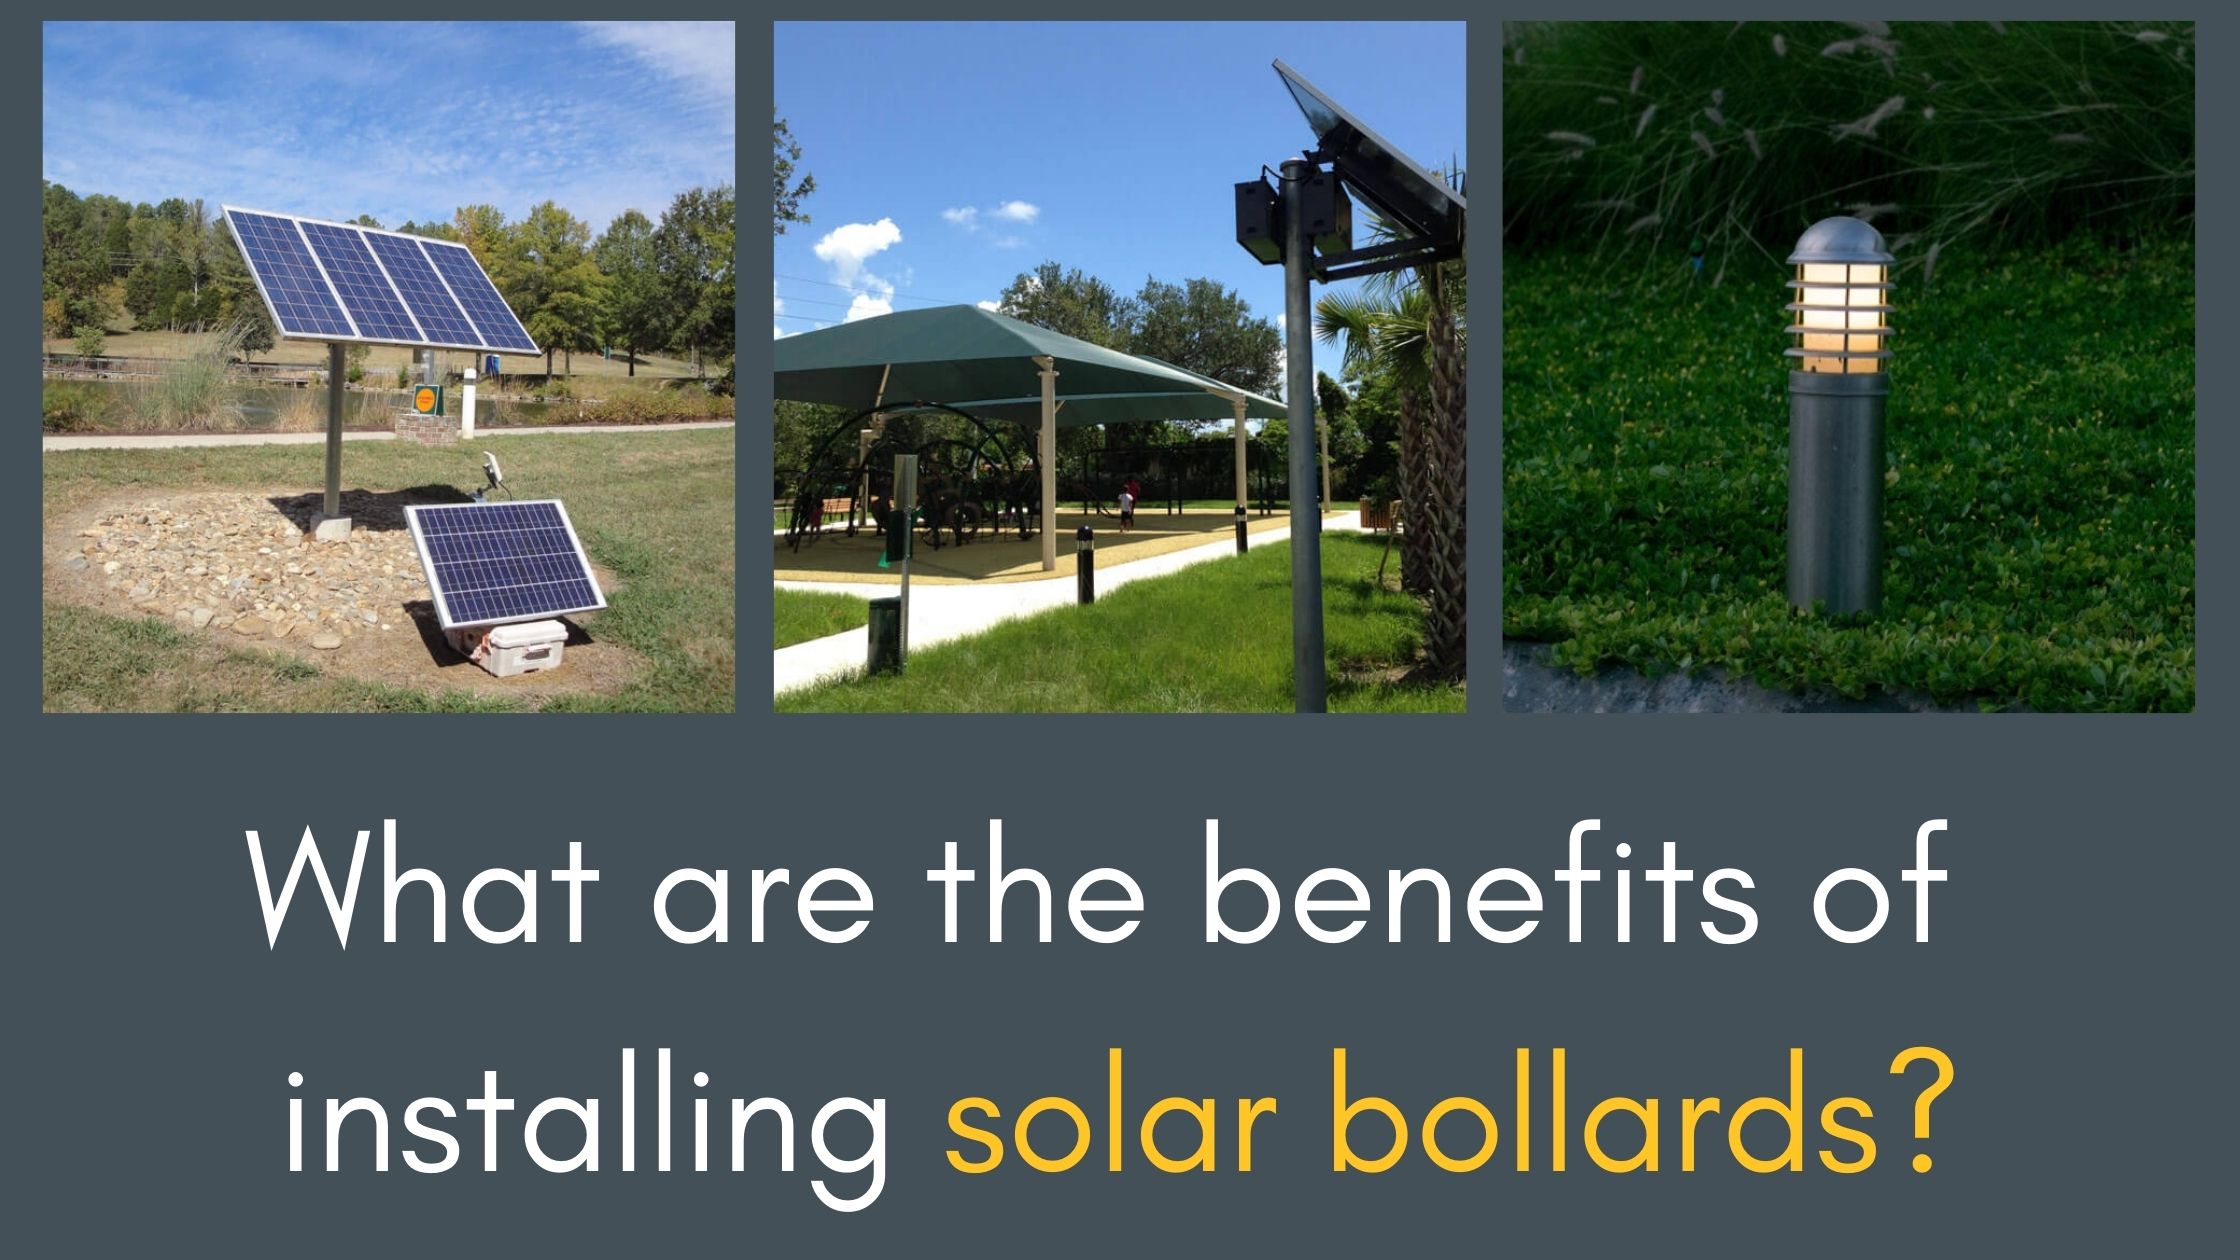 What are the advantages of using solar bollards?